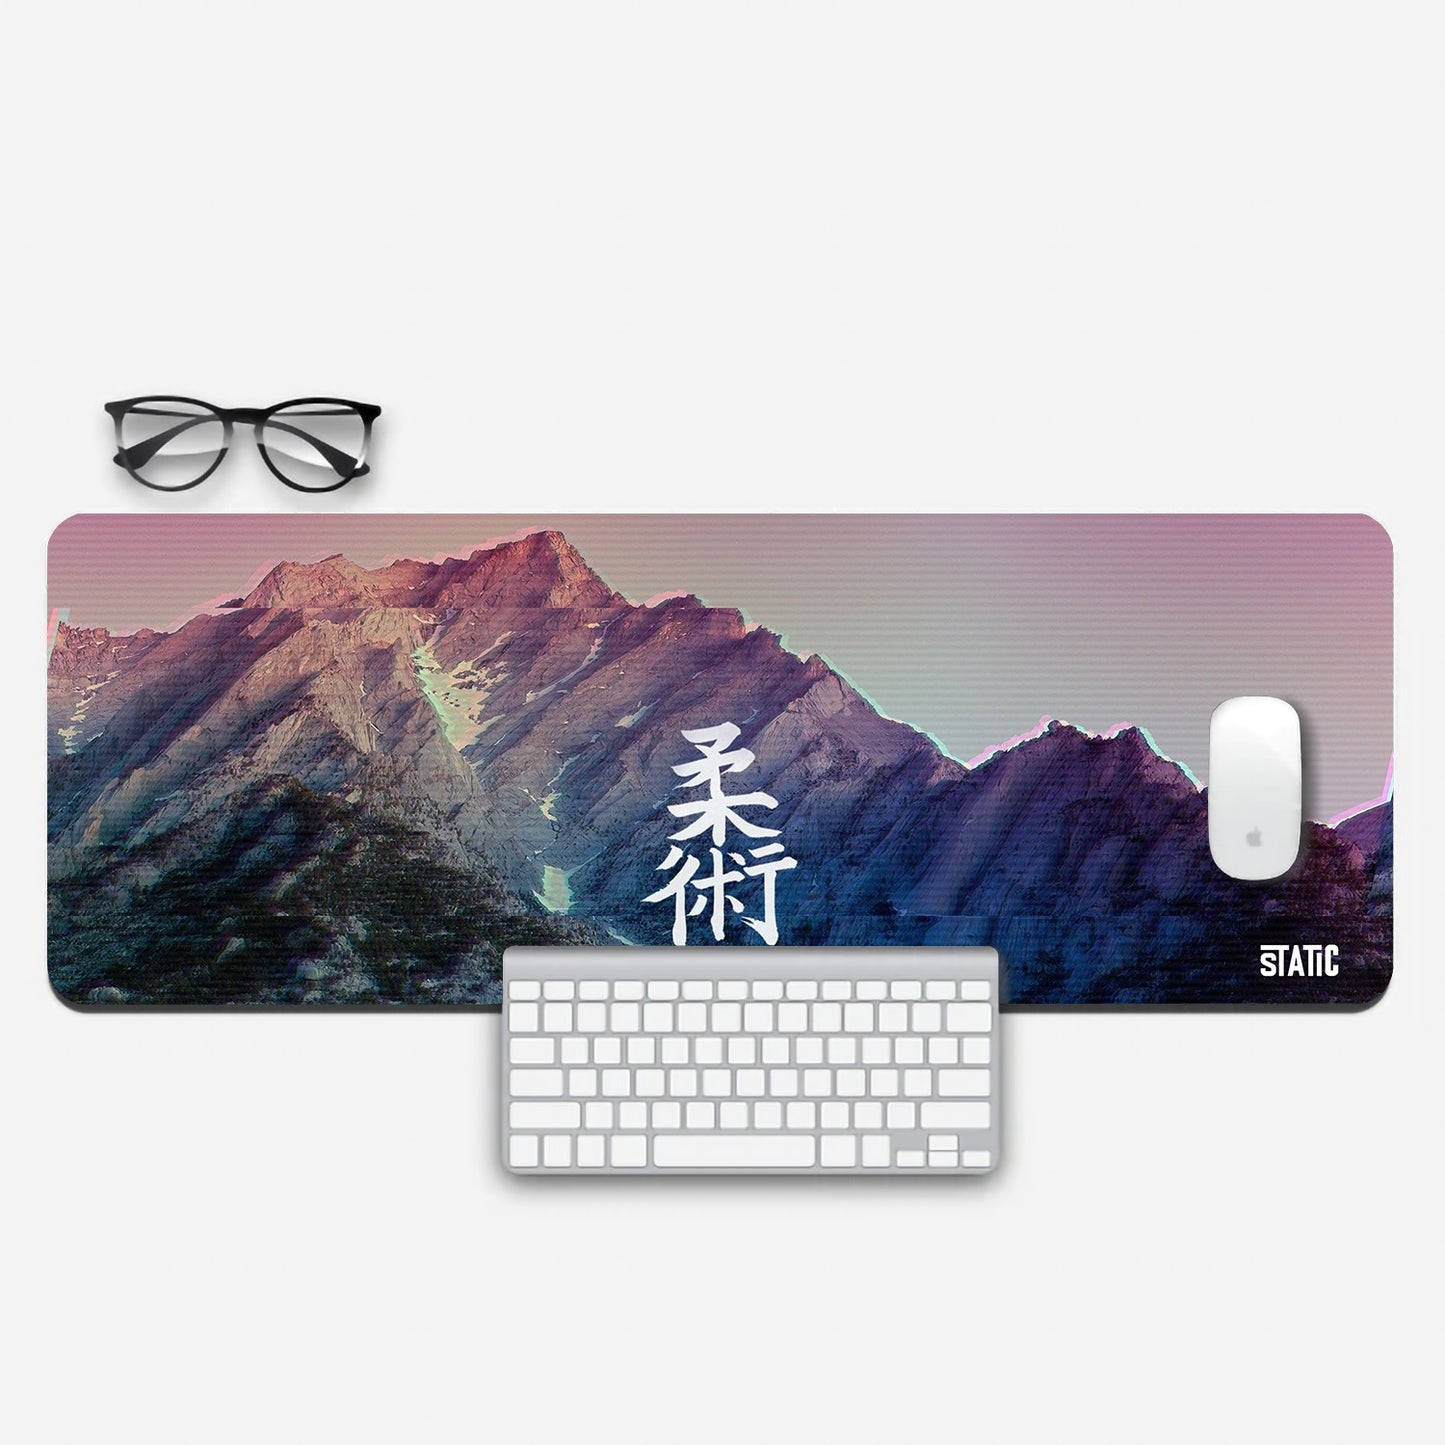 Elevate your gaming with our Jutsu-Ban Extended Gaming Mouse Pad. Immerse yourself in a snowy mountain vista with captivating purple and green hues, enhanced by a TV haze effect. Bold Japanese characters "Jutsu-Ban" add authenticity to your setup. This pad combines style and precision, taking your gaming to new heights. Upgrade today for a gaming experience that's both immersive and aesthetically pleasing.